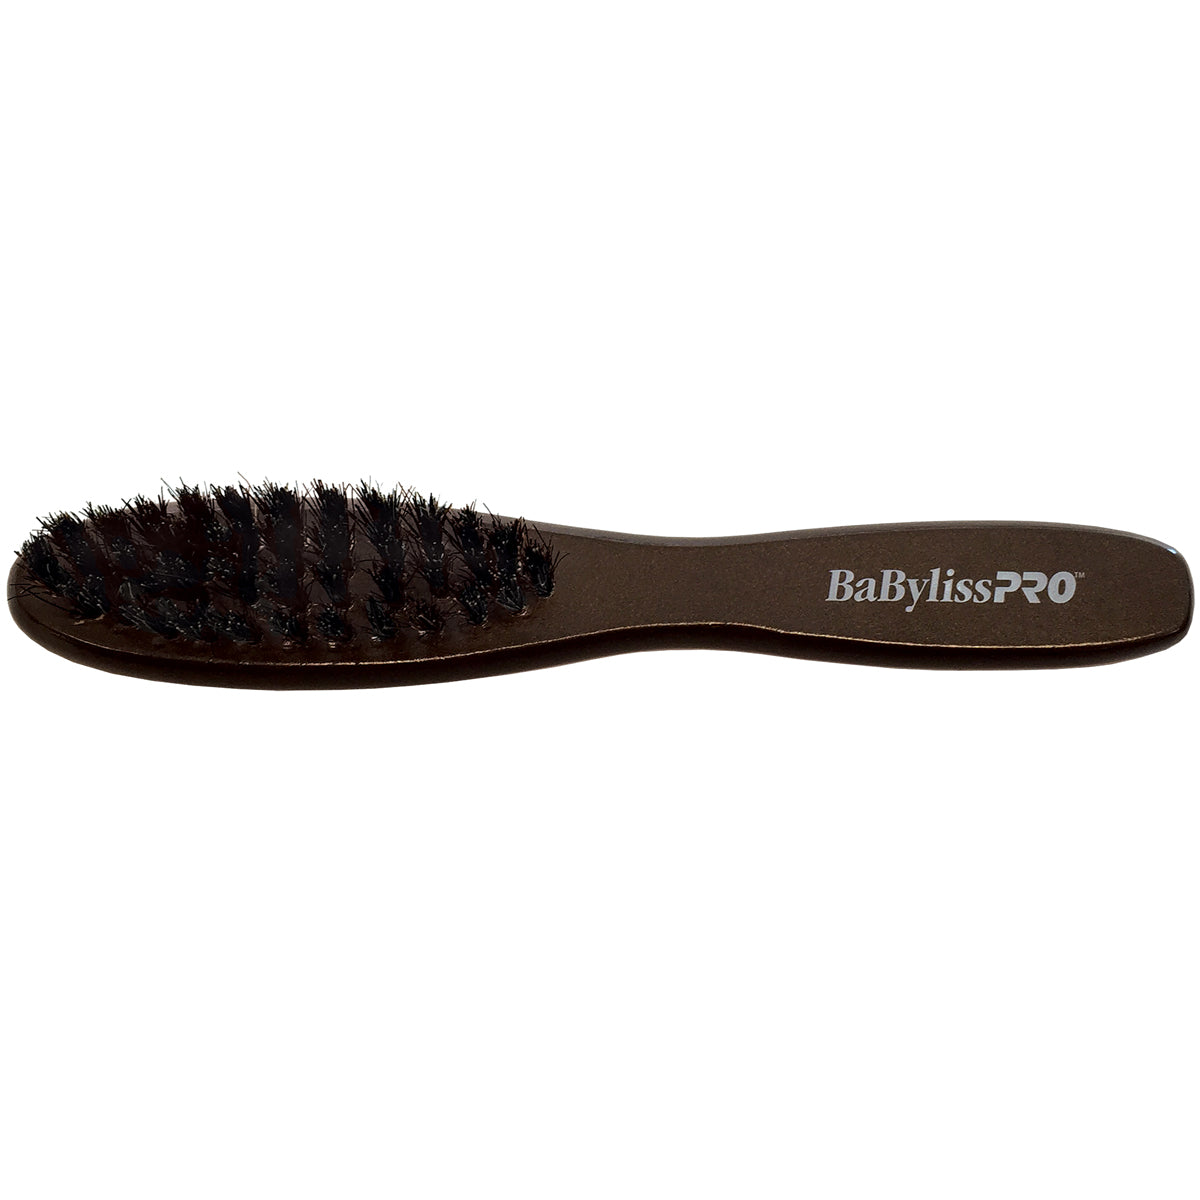 Brosse Babyliss Pro 6-1/2 po pour barbe